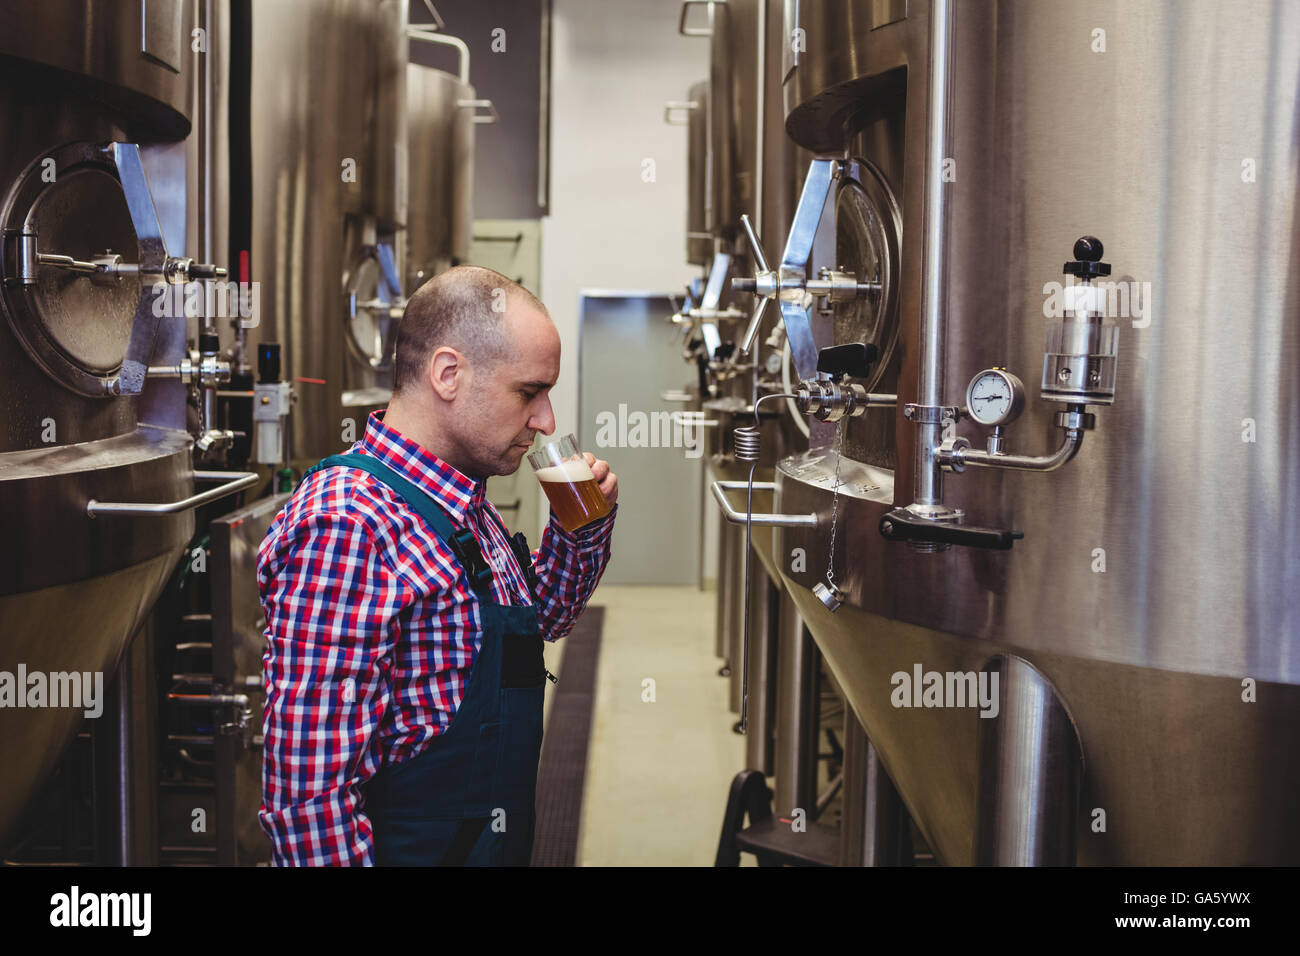 Manufacturer tasting beer at brewery Stock Photo